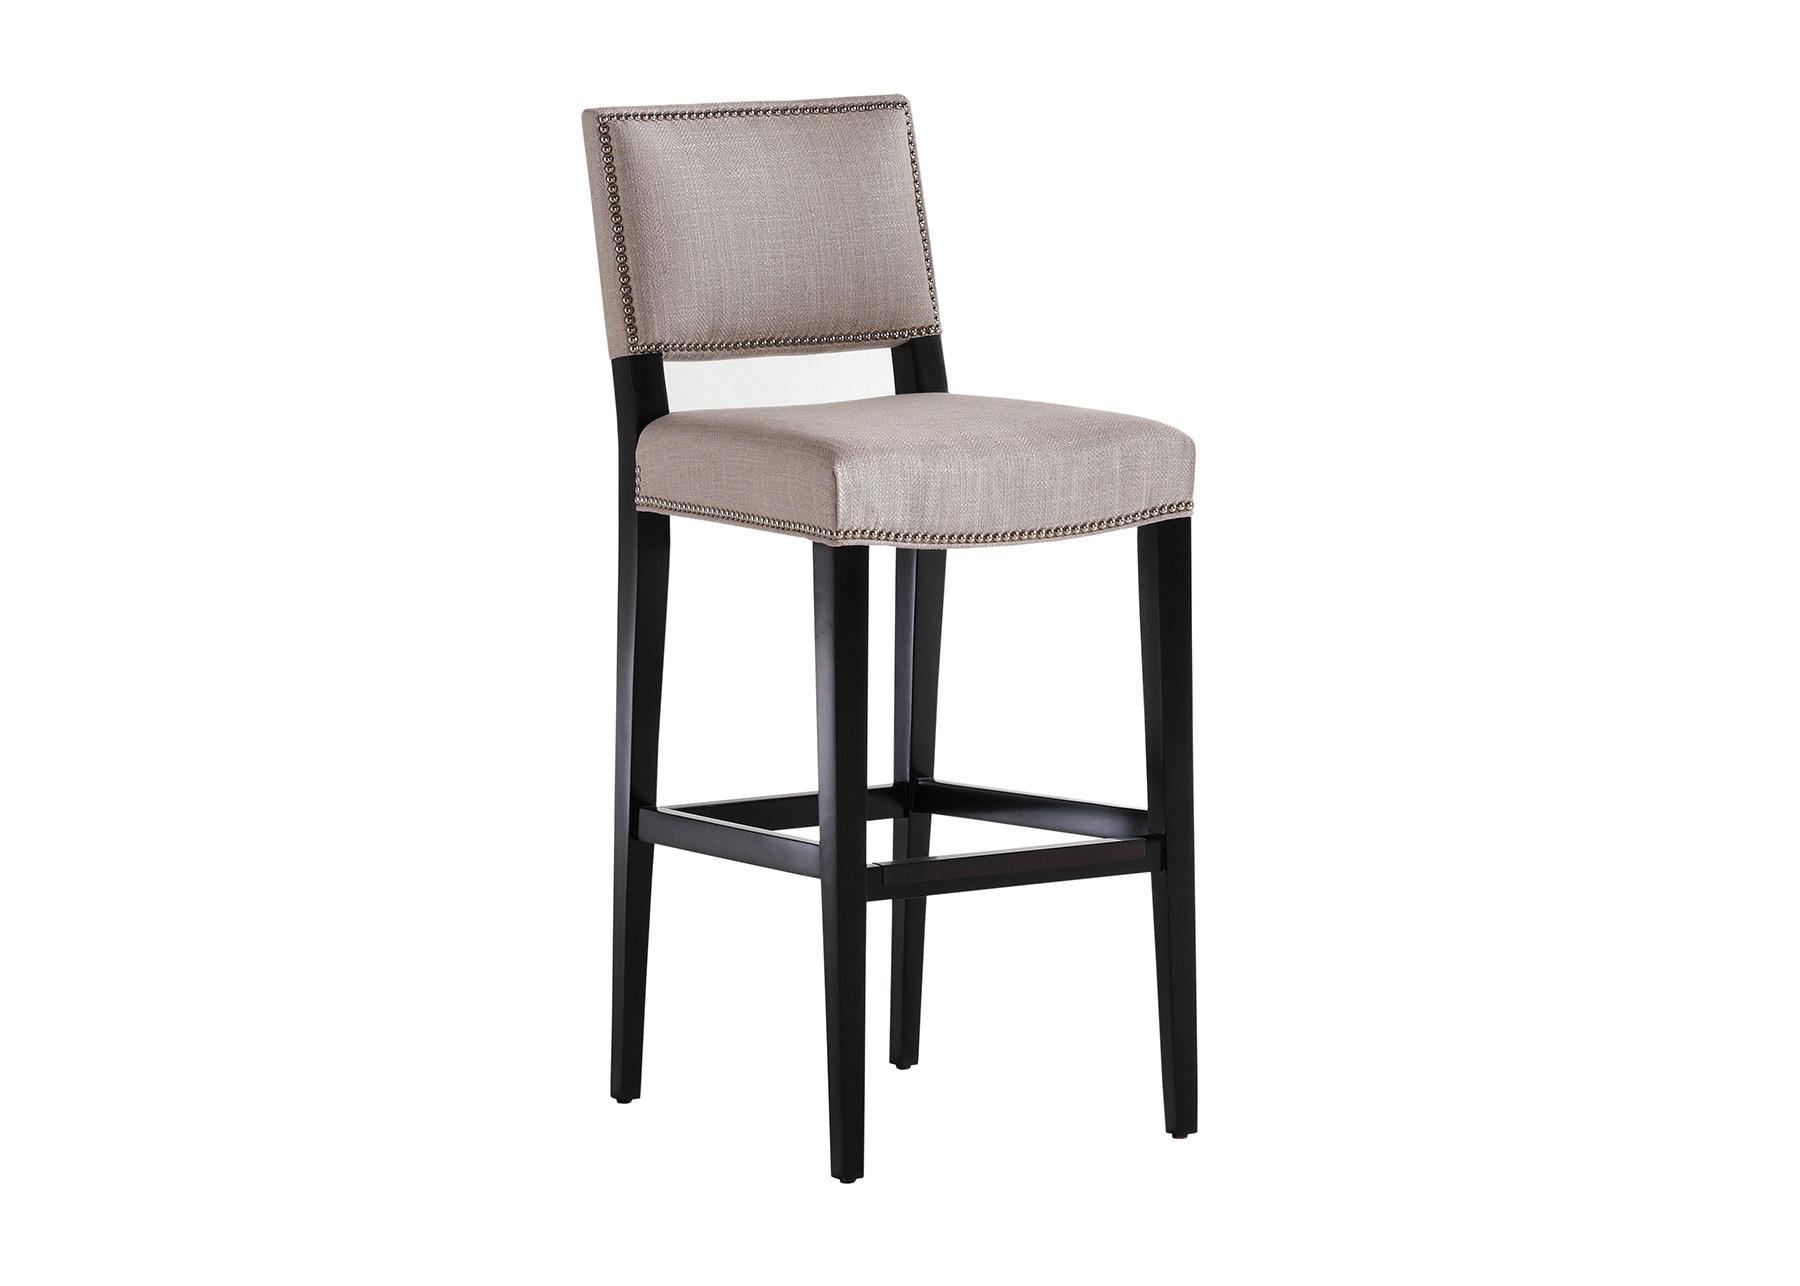 SHAW COUNTER STOOL